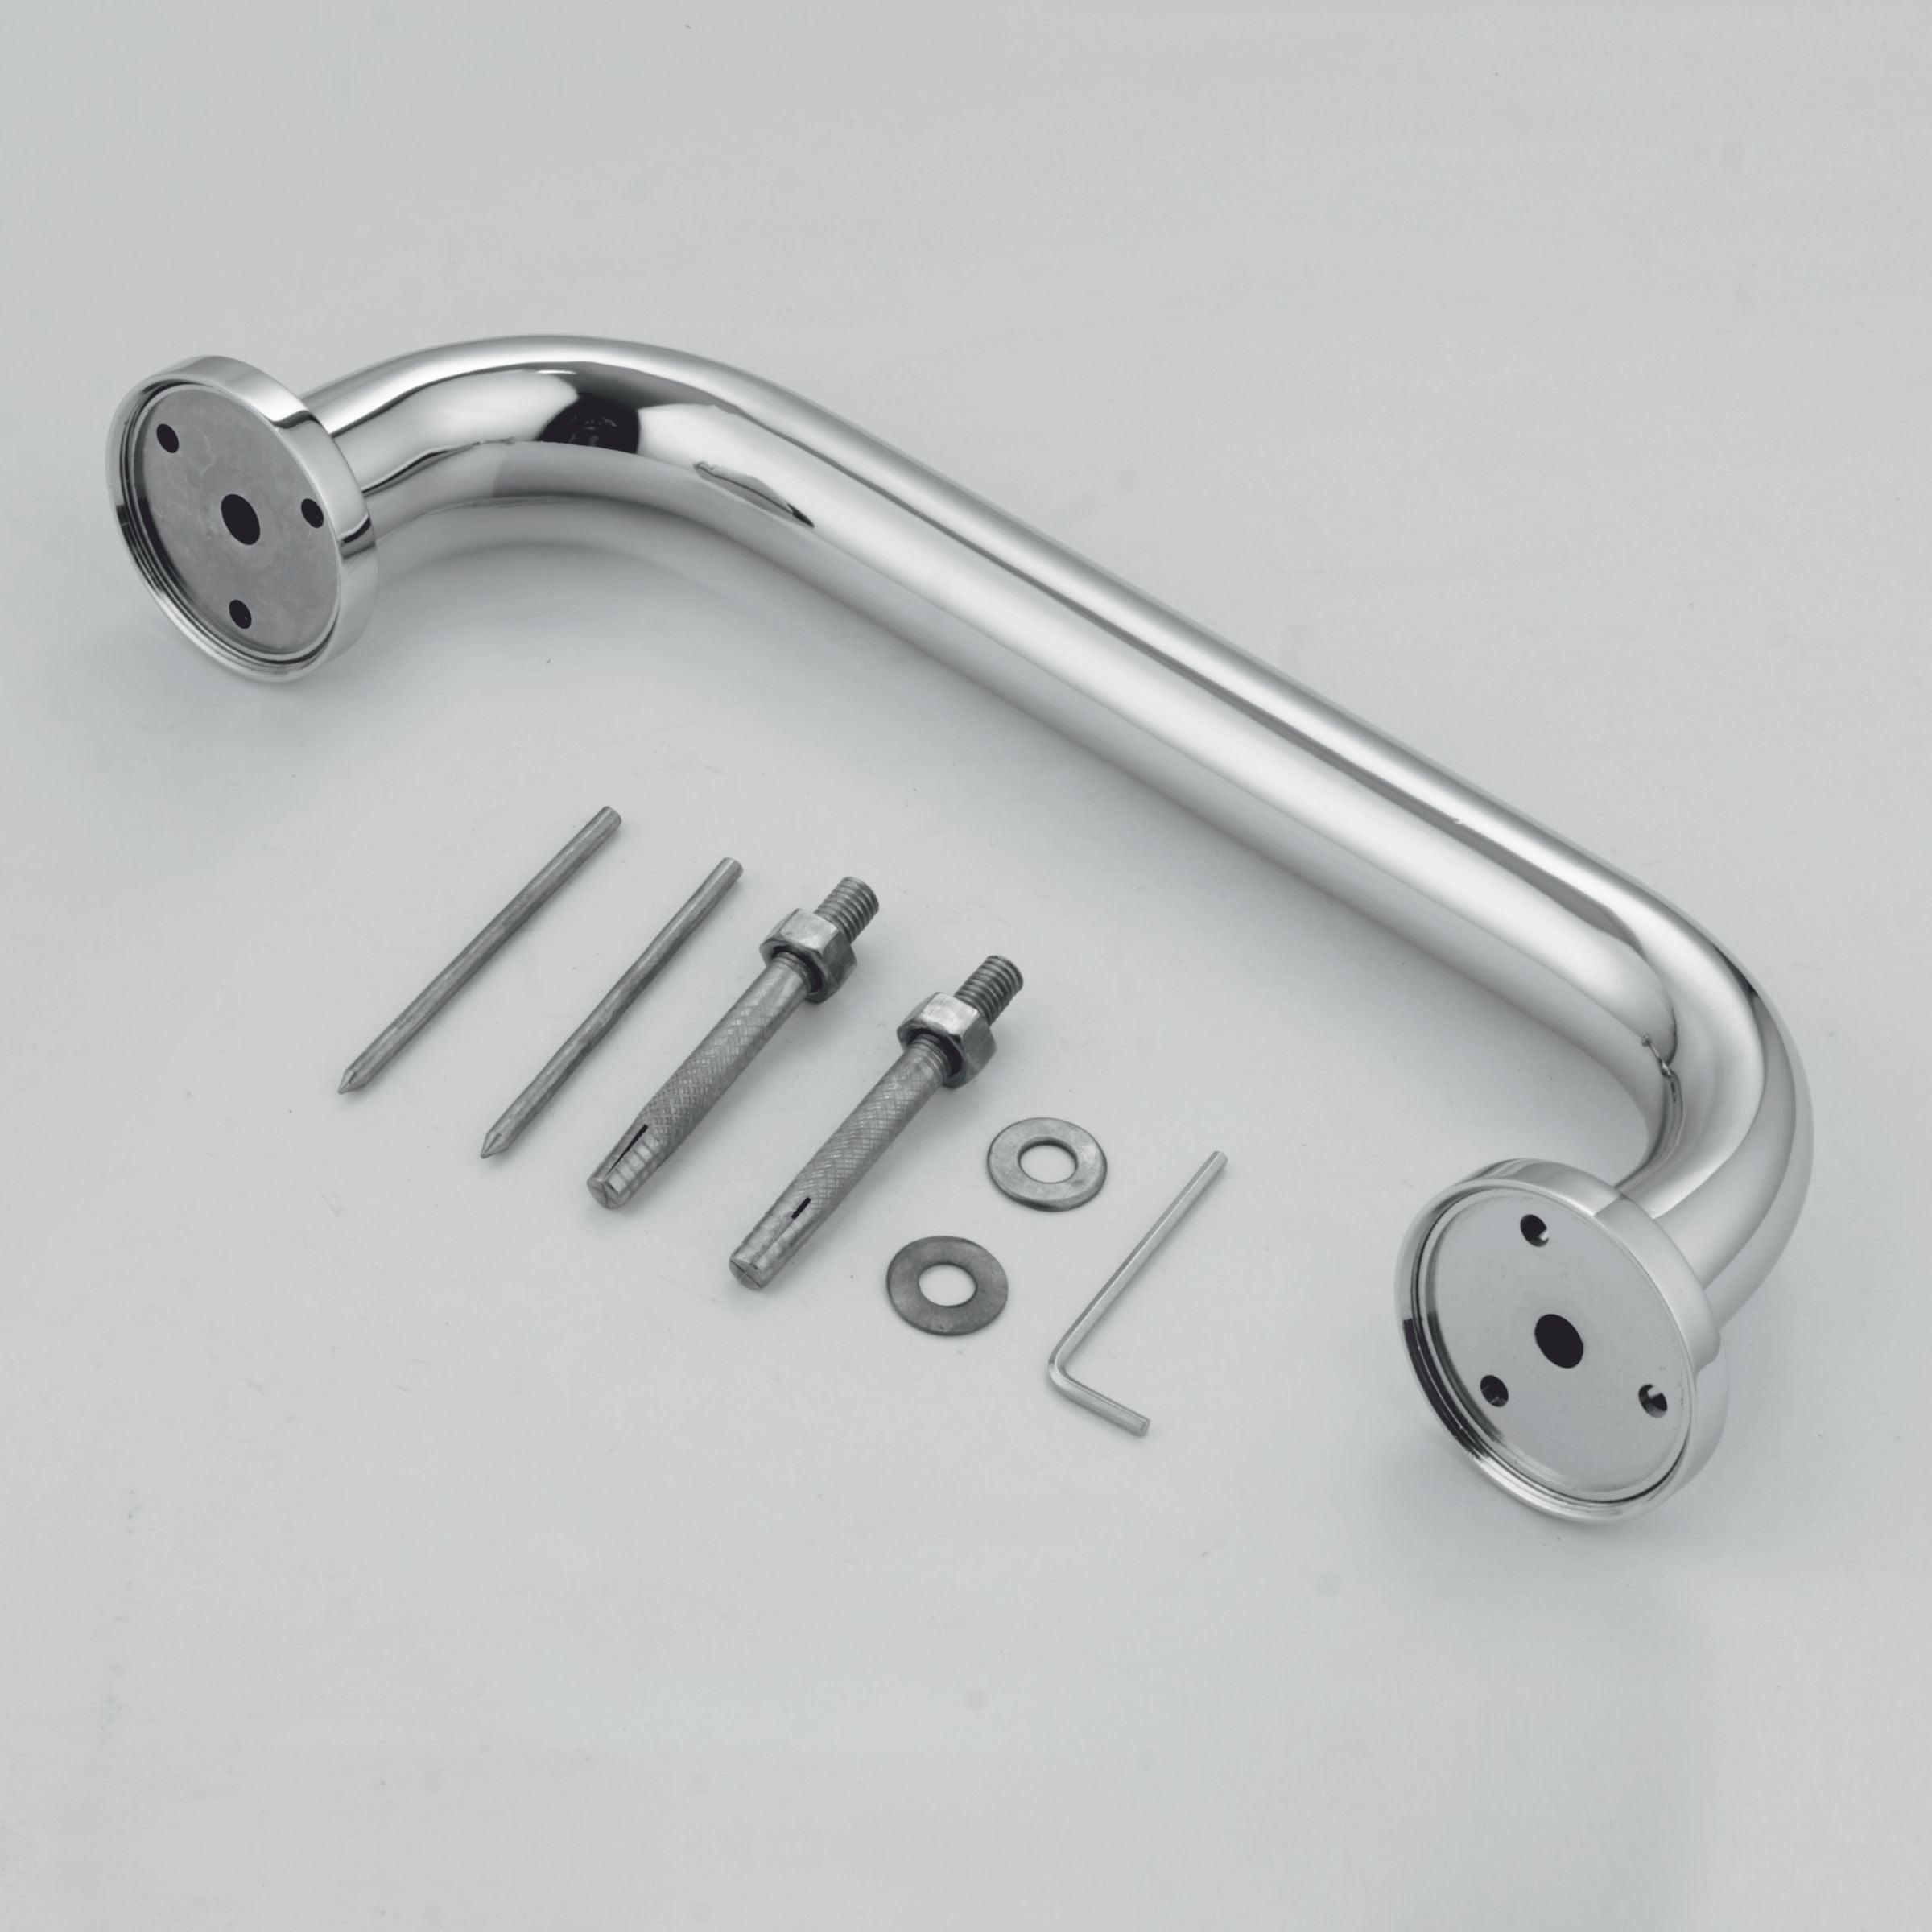 Brass Concealed Grab Bar (16 Inches) features